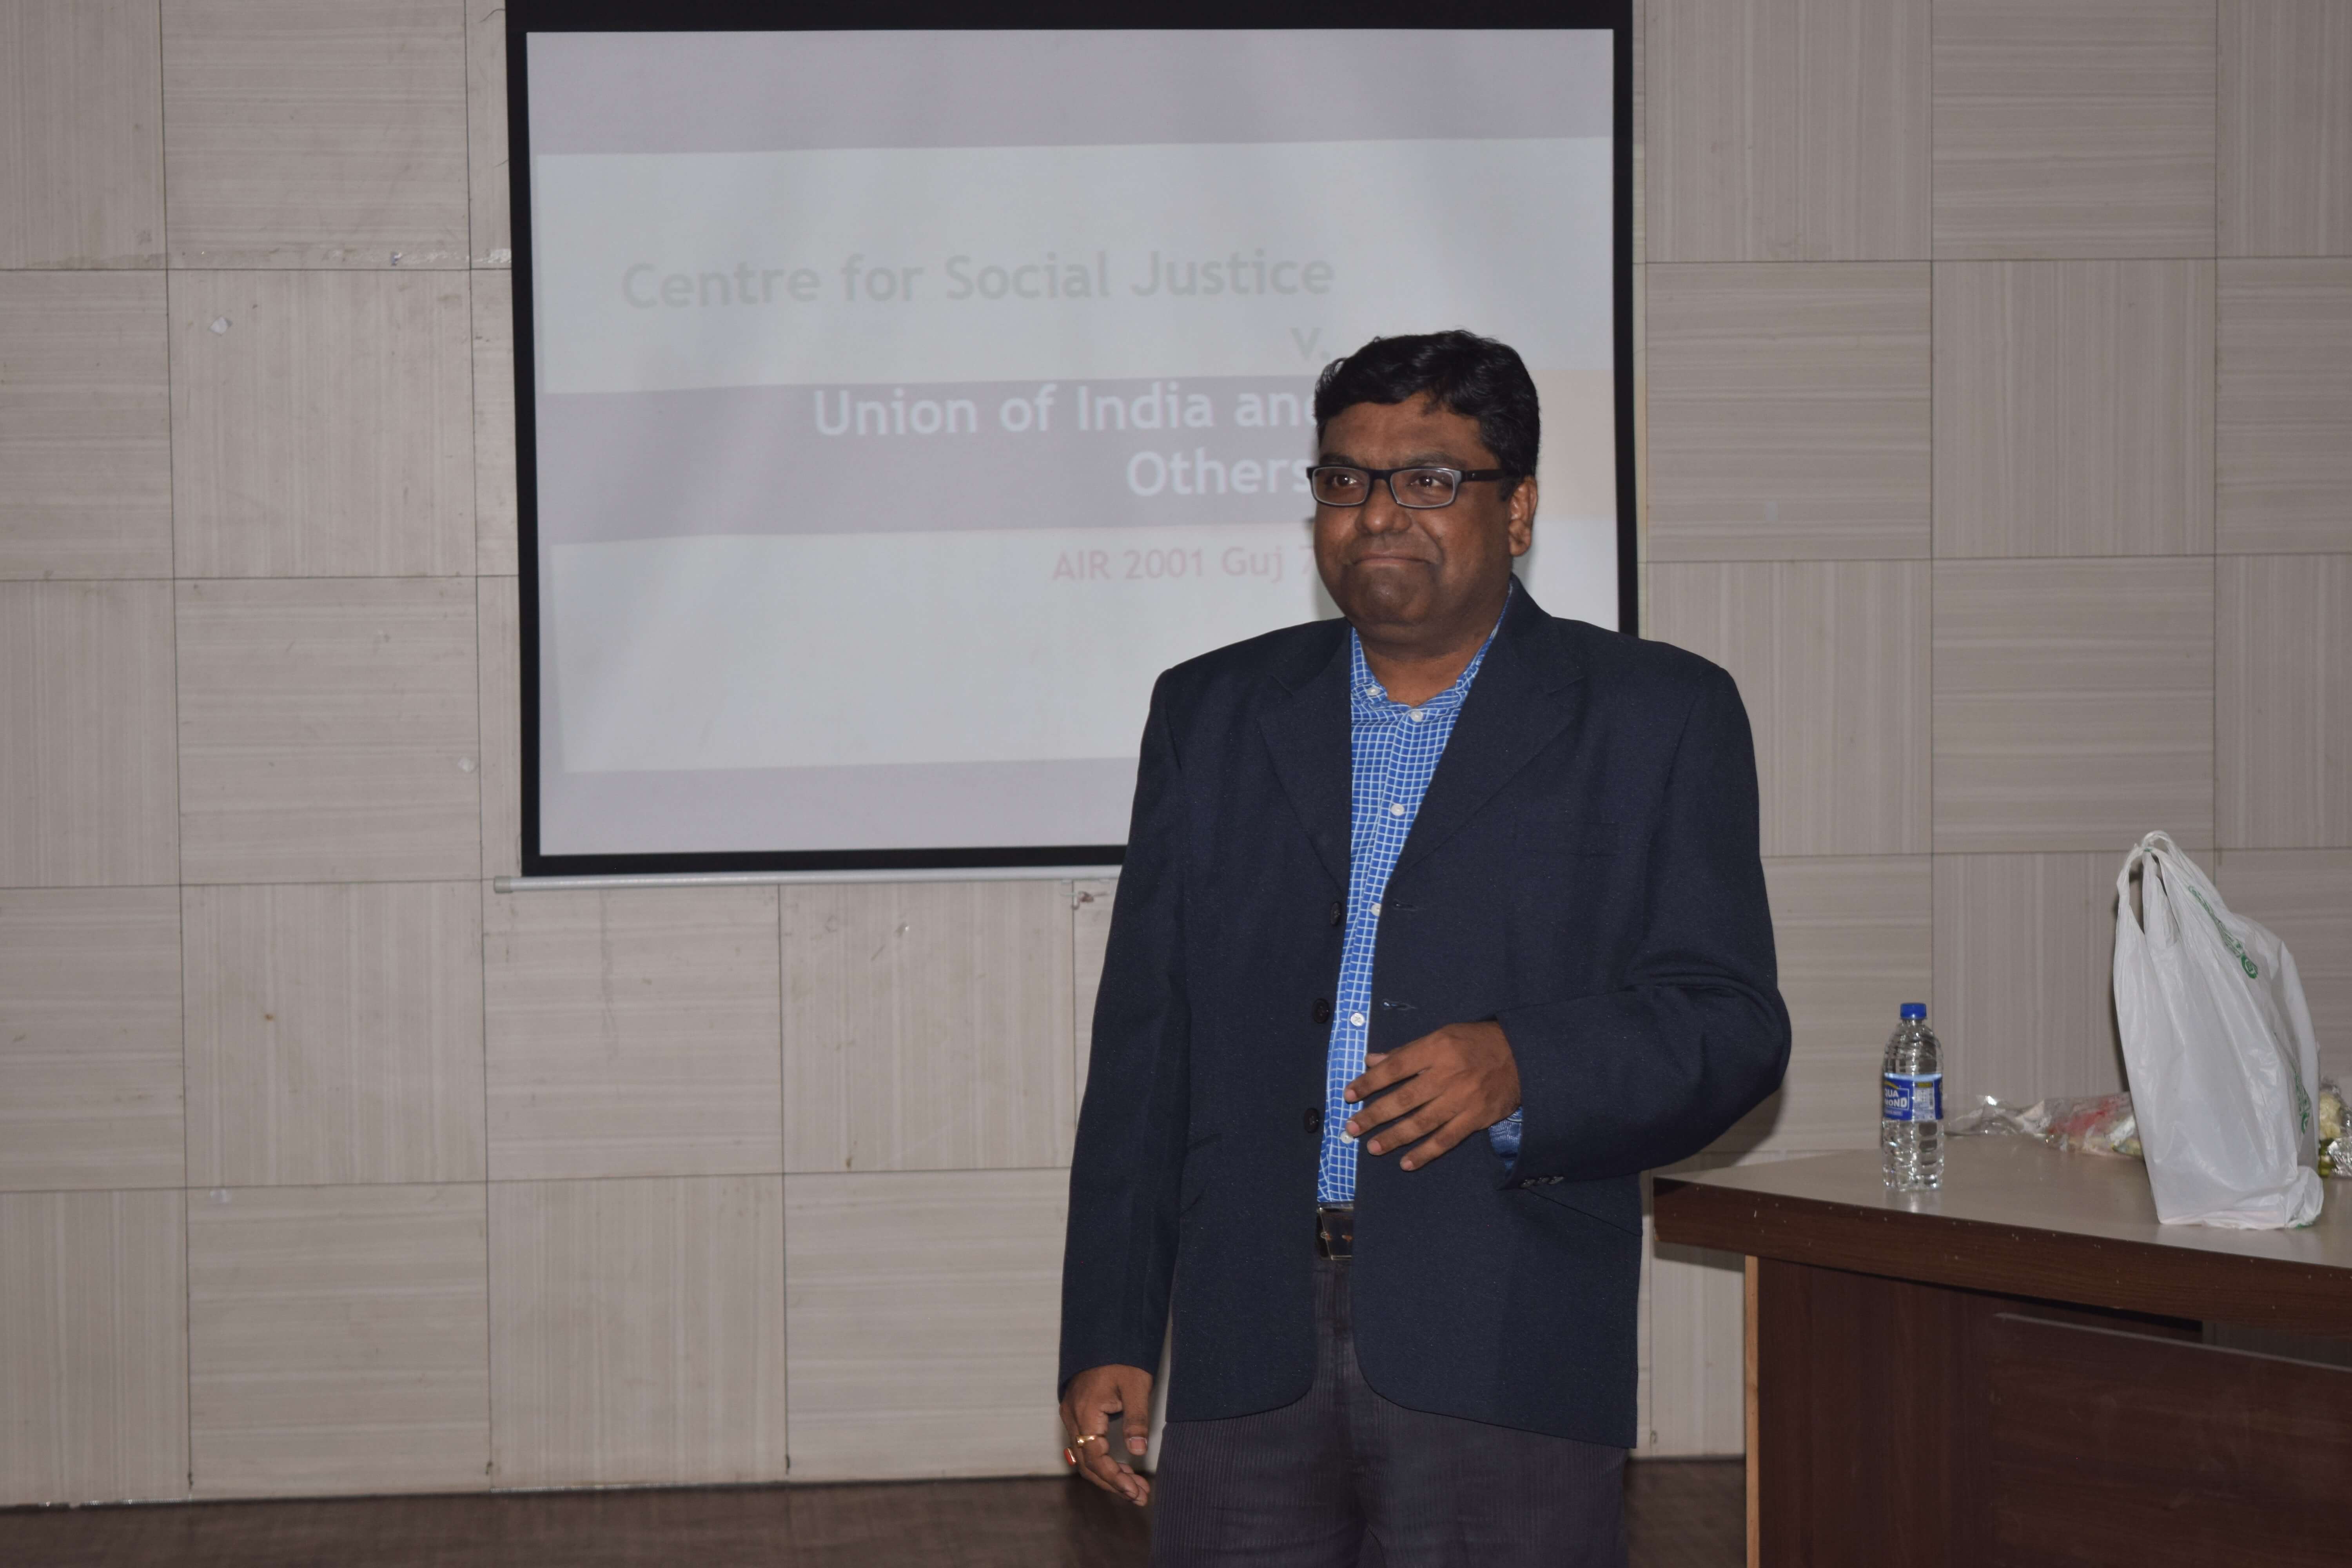 On 13th March, 2019 a Seminar on “Laws on Displacement, SEZs and Environmental, social Impact assessment in India” was held In JISU Auditorium. Dr Souvik Chatterji  presented his paper where it was shown that Halar Utkarsh Samity case and Narmada Bachao Andolan case had mentioned that adequate compensation and rehabilitation of oustees can only balance displacement. He also gave example of SEZs in China from where India can learn. Prof. Arup Poddar, Professor, WB NUJS, mentioned that environmental economic assessment has to happen according to the rules. In the interactive session students asked questions to the panelists. At the end certificates were offered to the students.